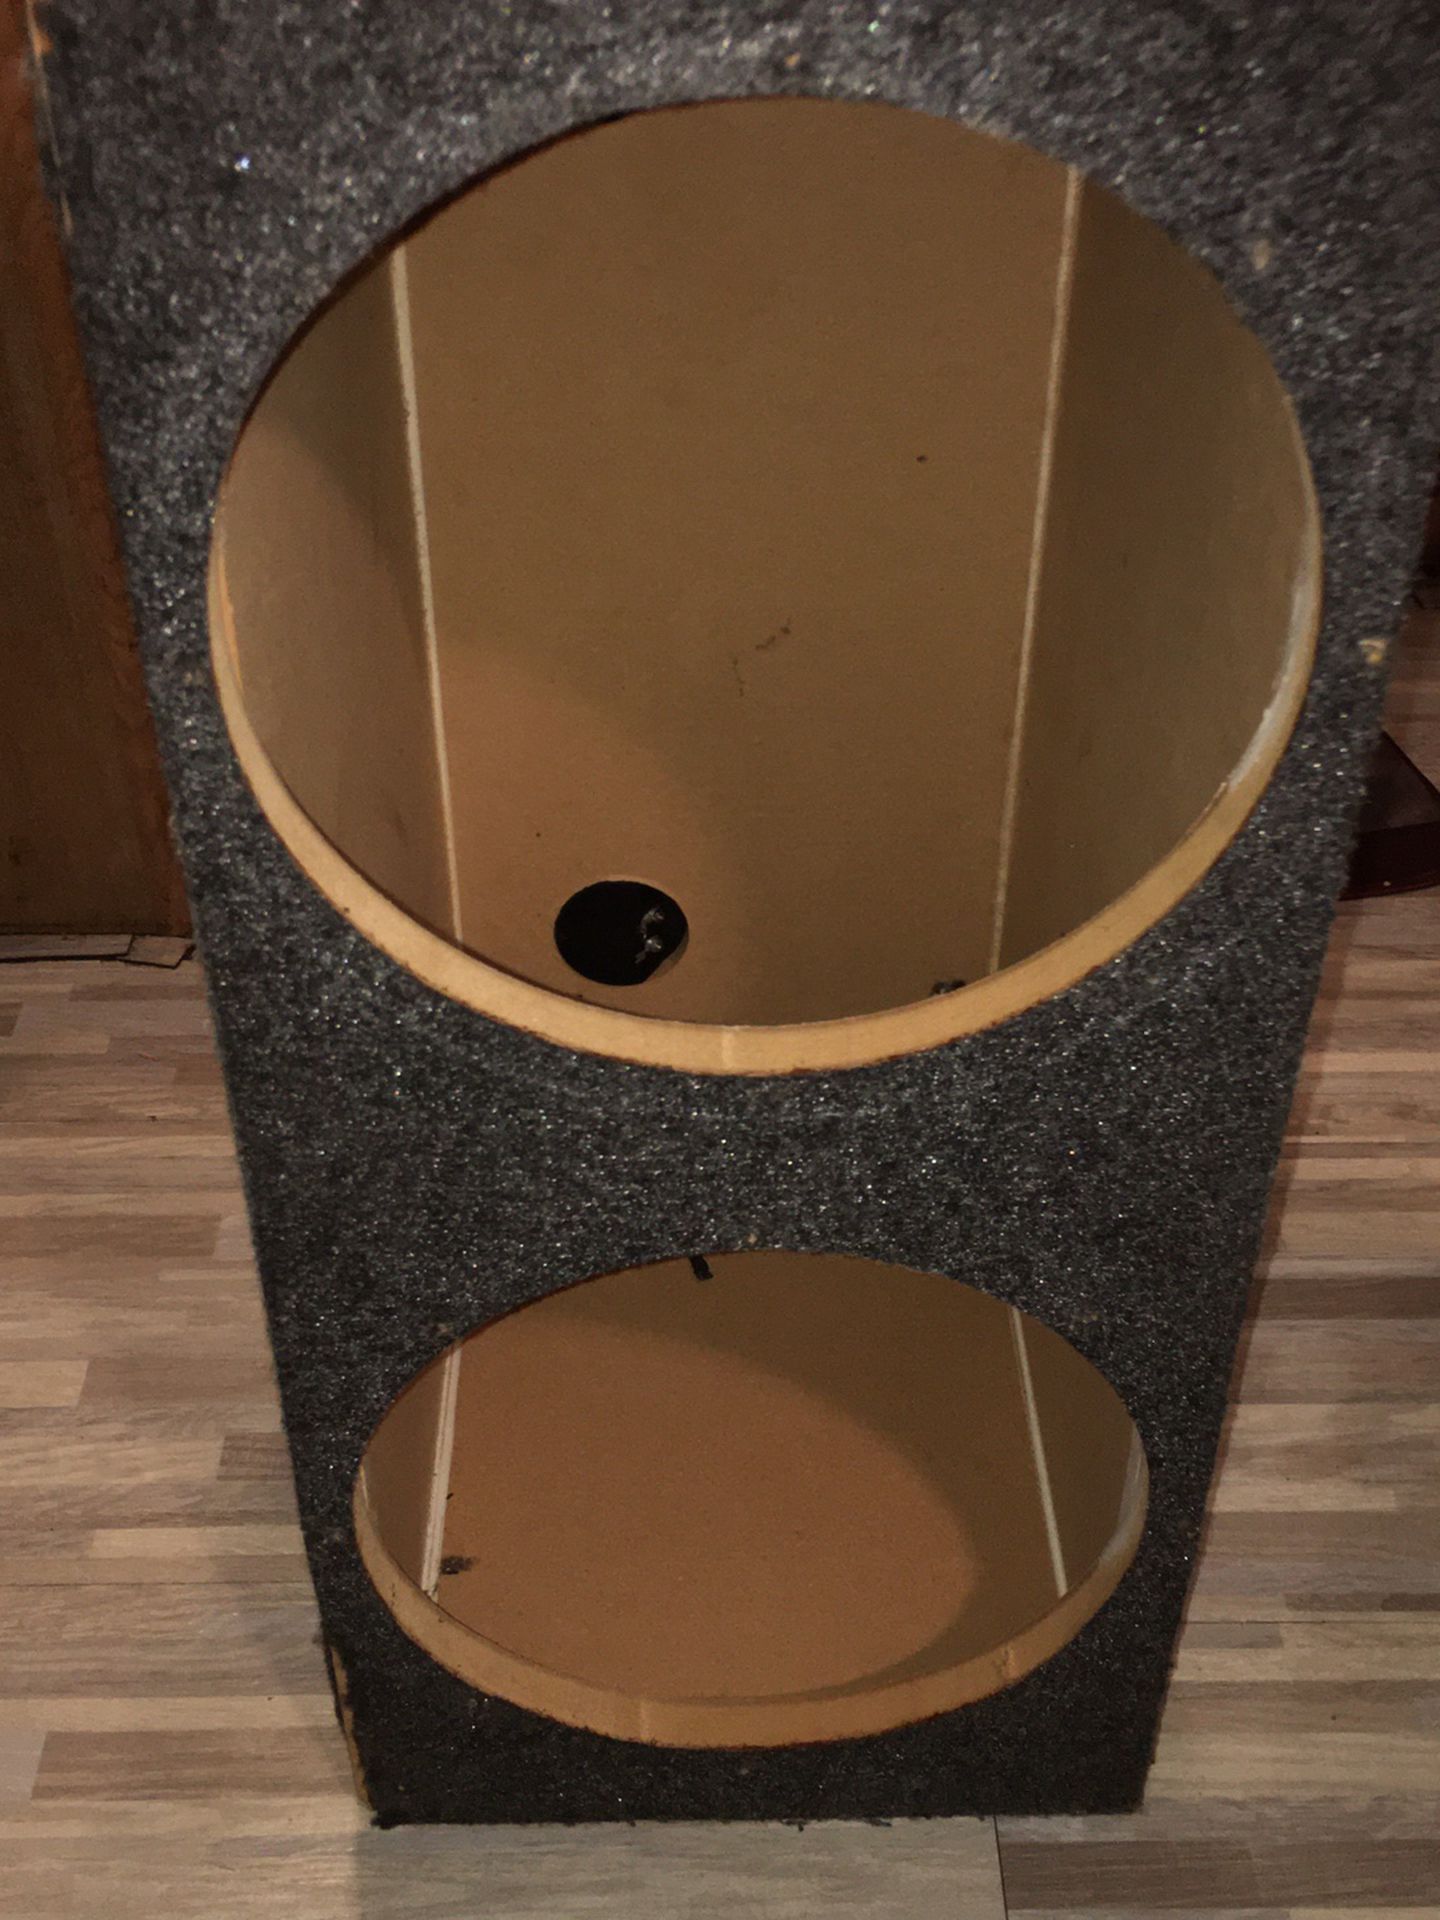 2/12 Subwoofers Box Only!!!!